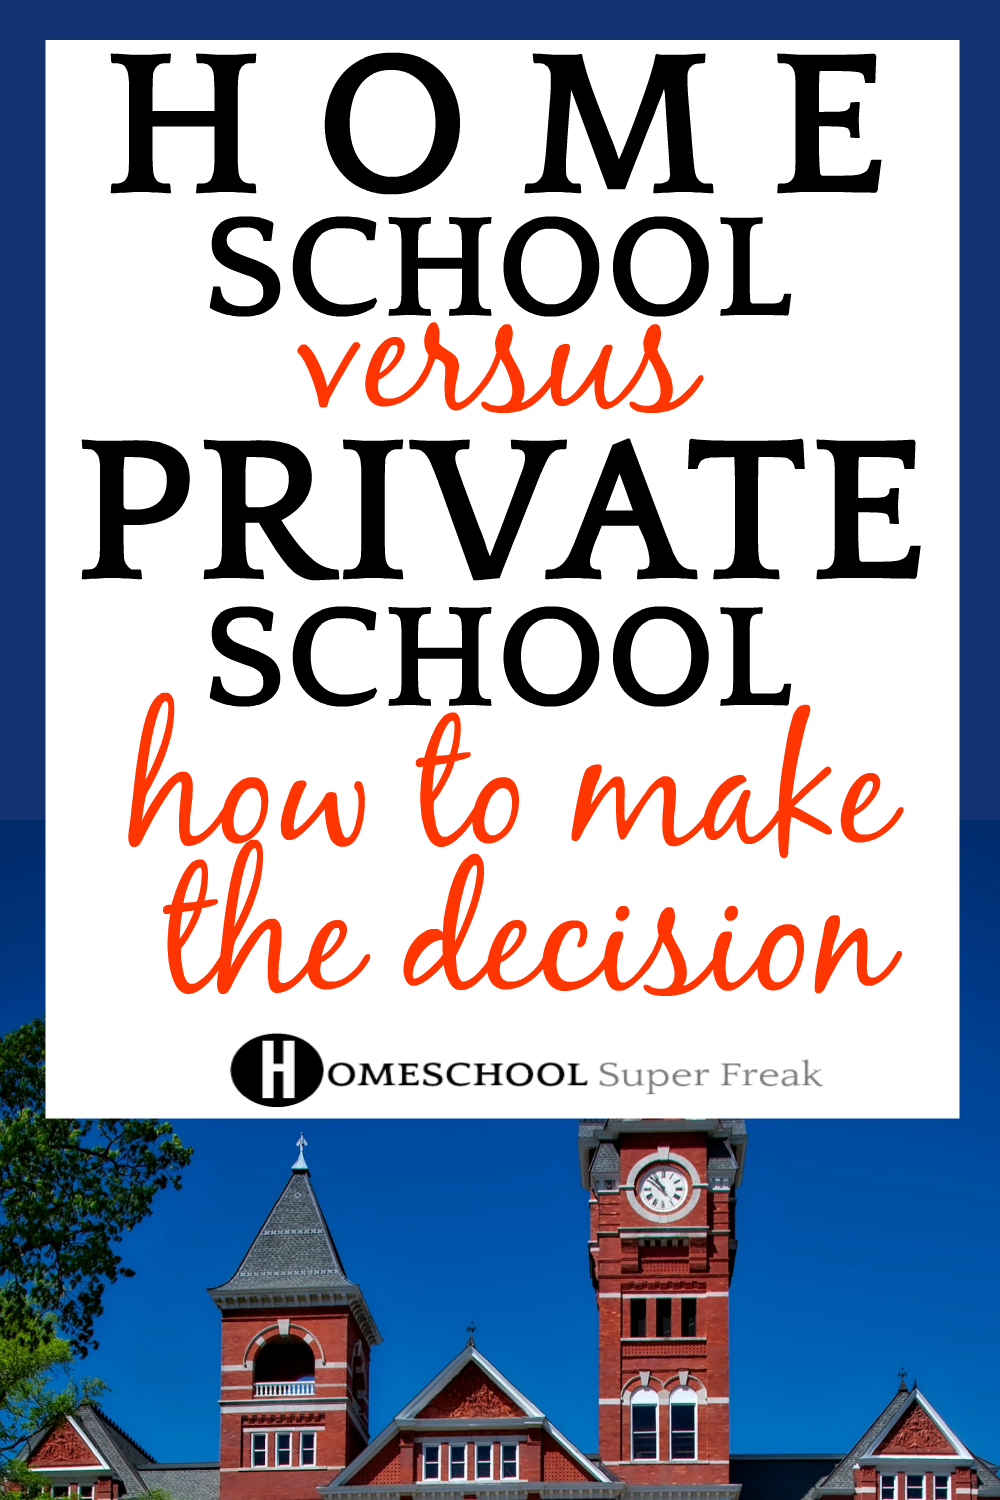 Homeschool vs Private School: 6 Things to Ask + 1 Mom's Experience